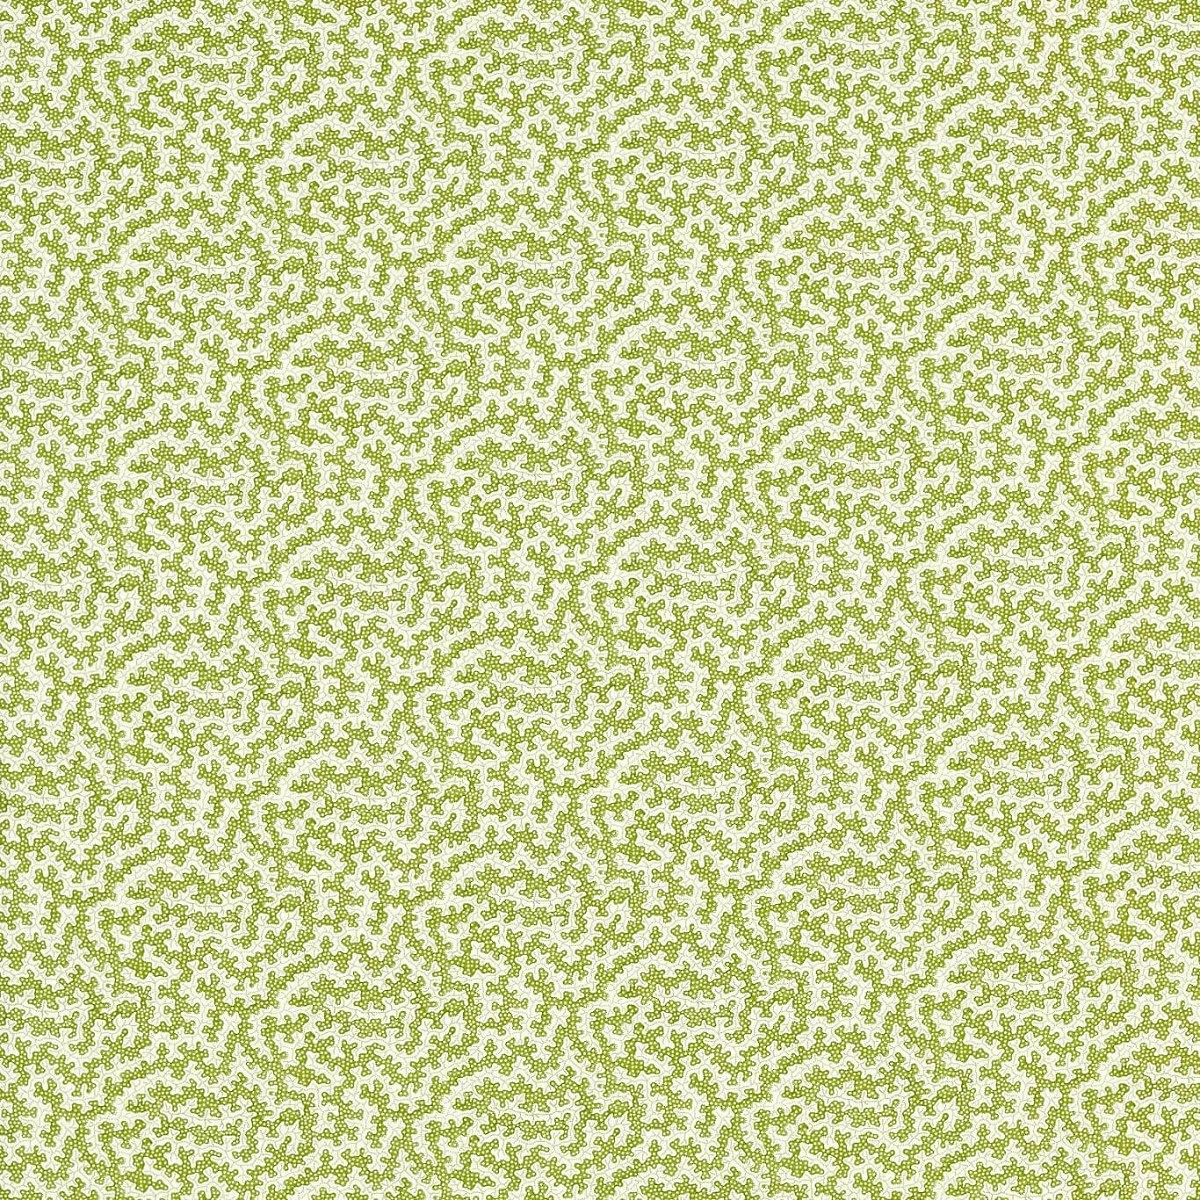 Truffle Olive Fabric by Sanderson